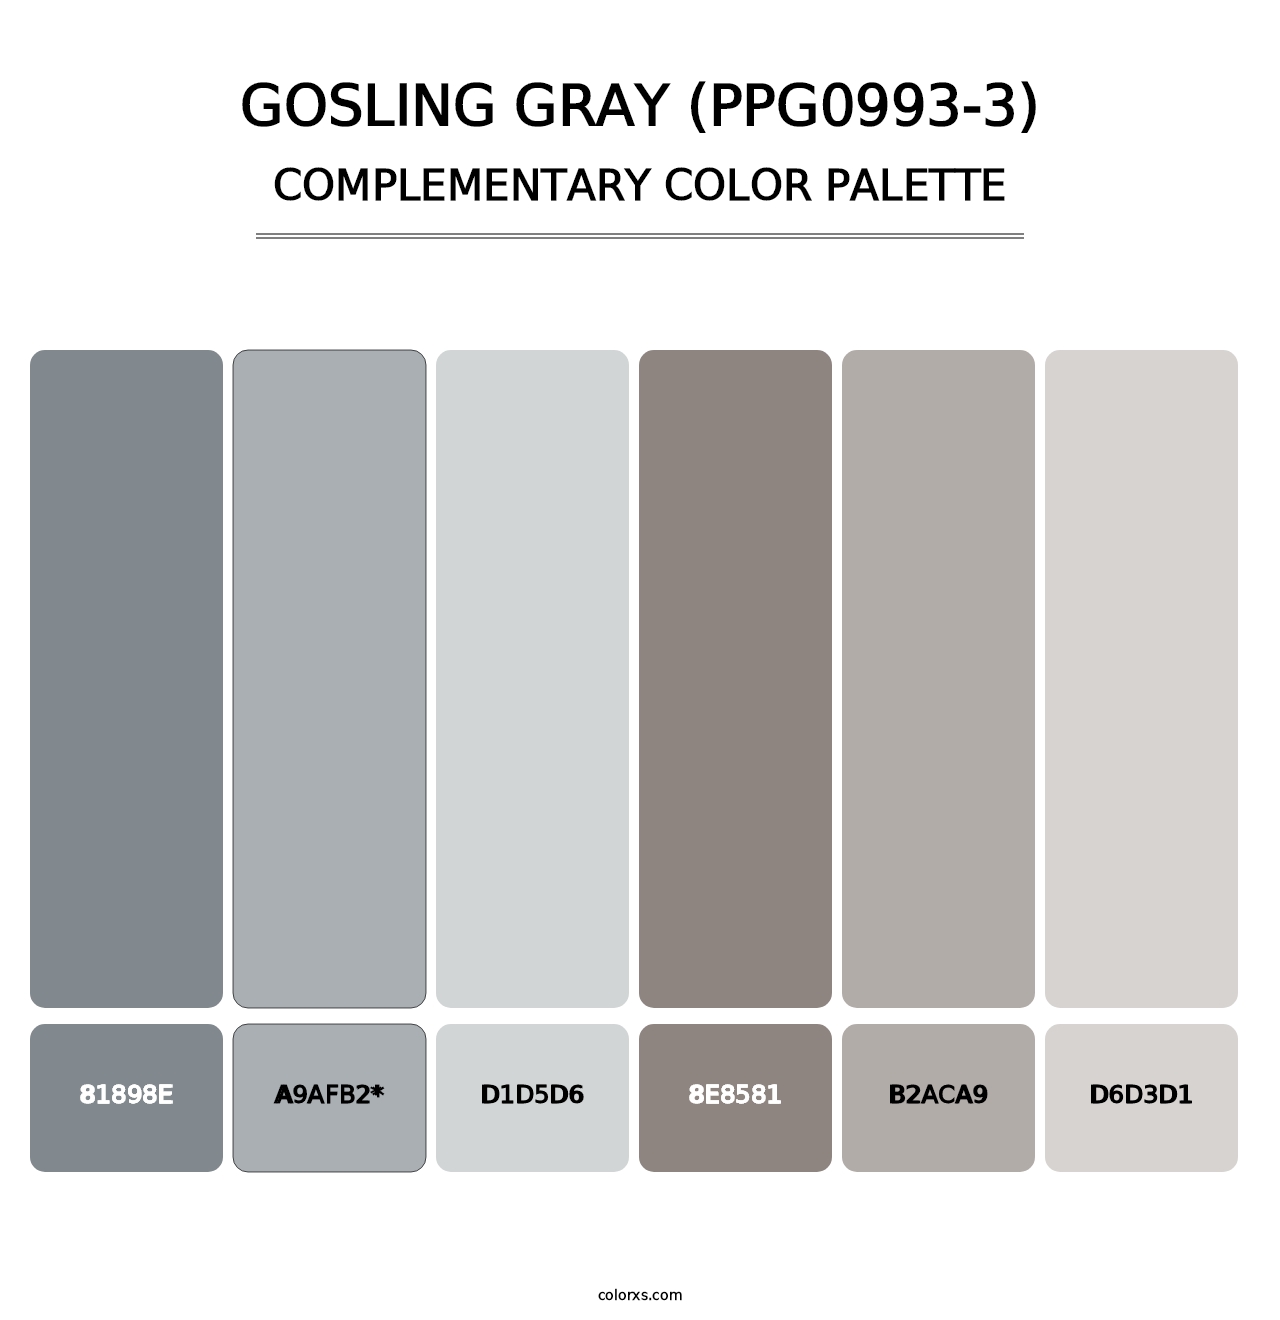 Gosling Gray (PPG0993-3) - Complementary Color Palette